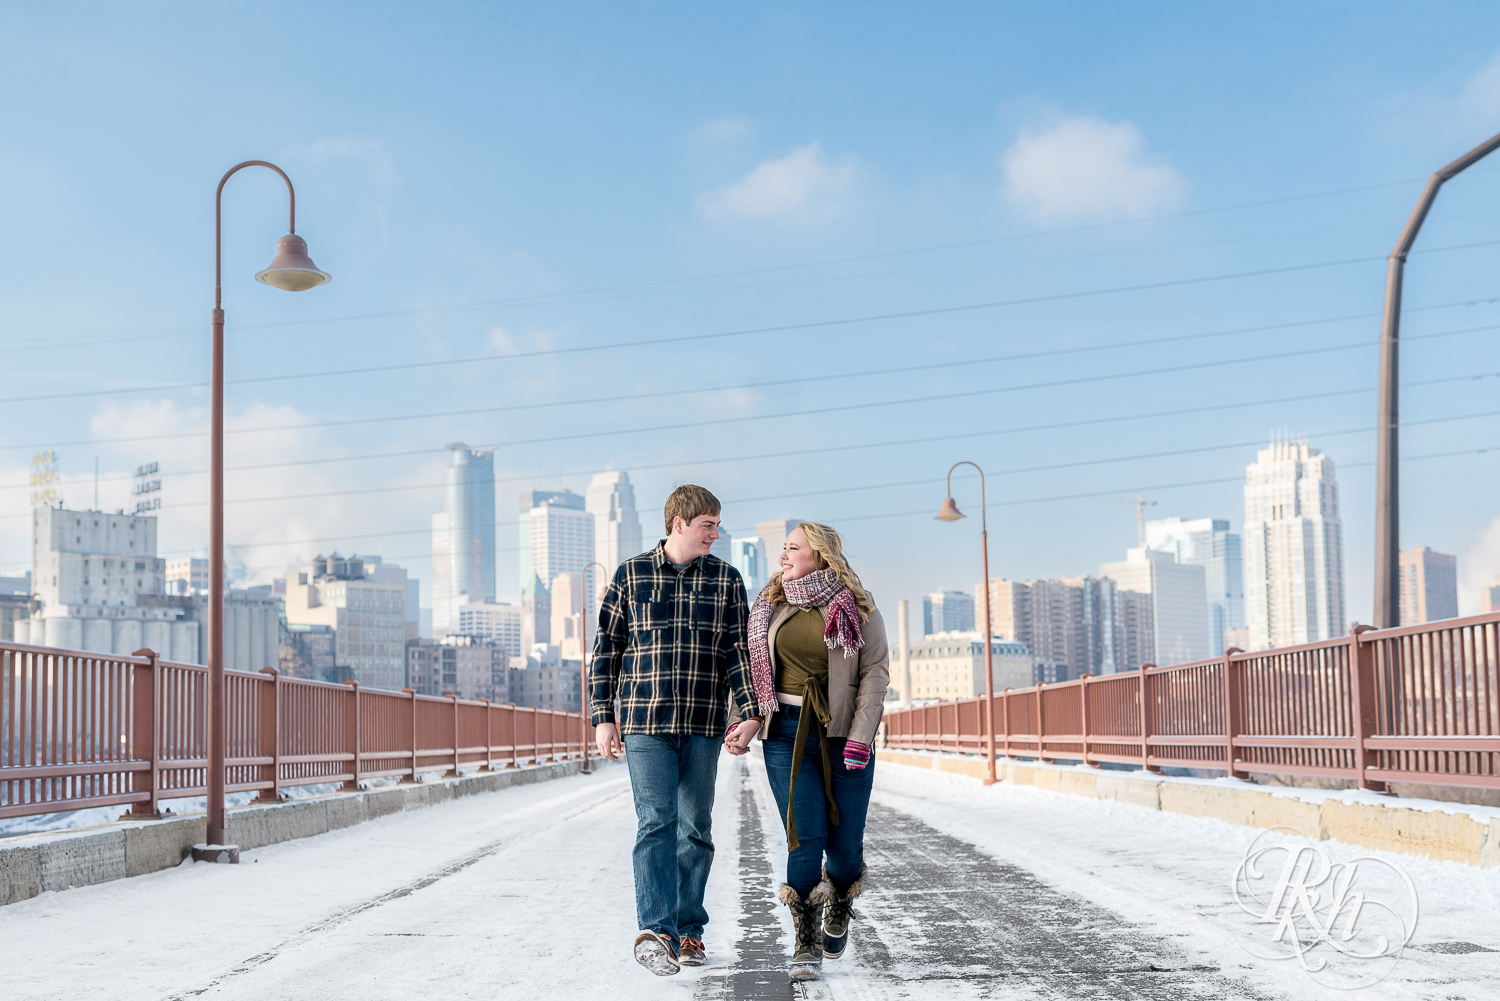 Man and woman walking and holding hands on the Stone Arch Bridge in Minneapolis, Minnesota.